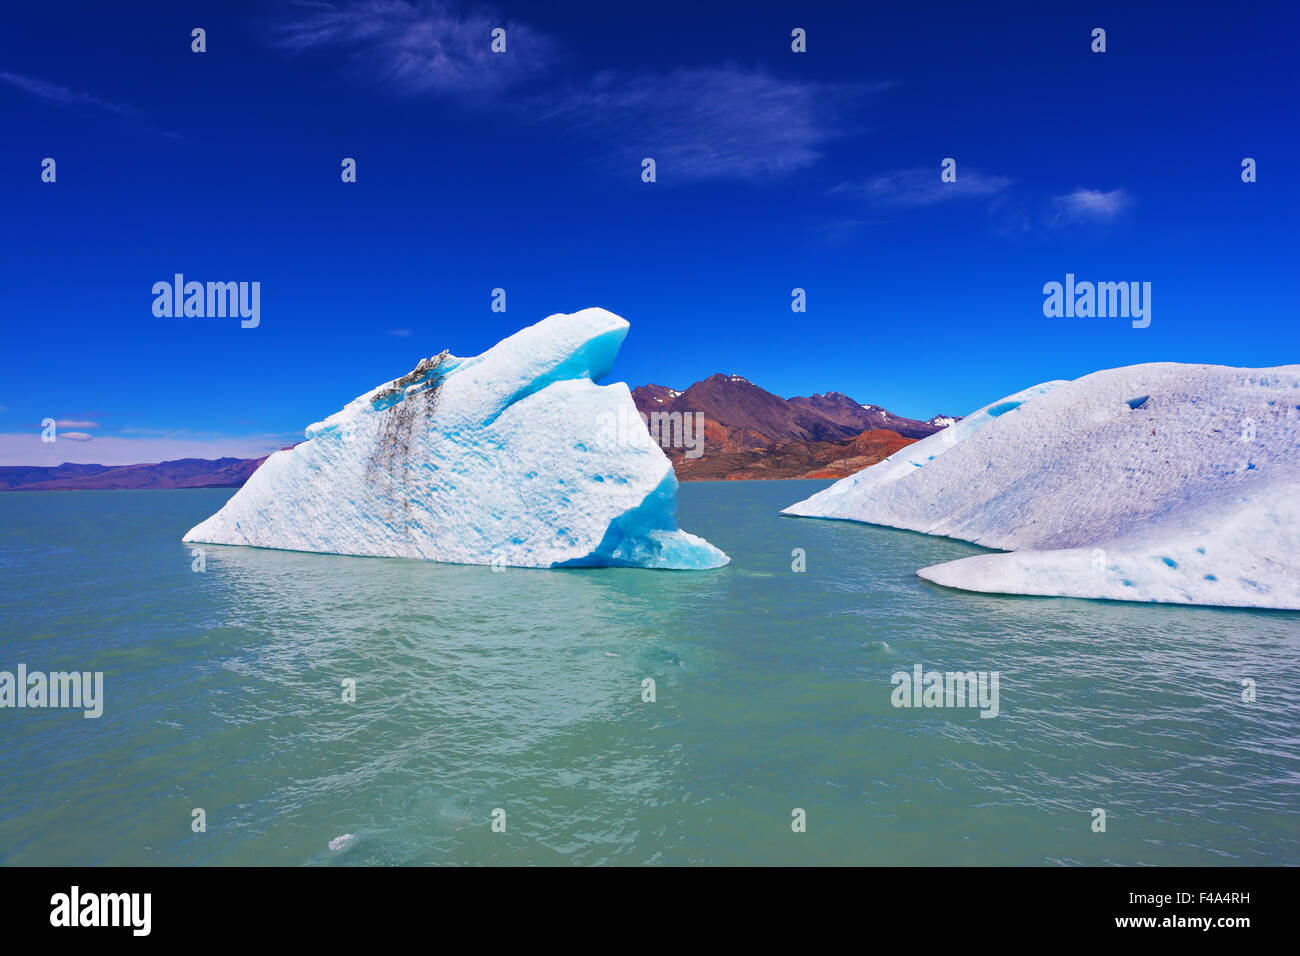 Huge icebergs floating in the icy water Stock Photo